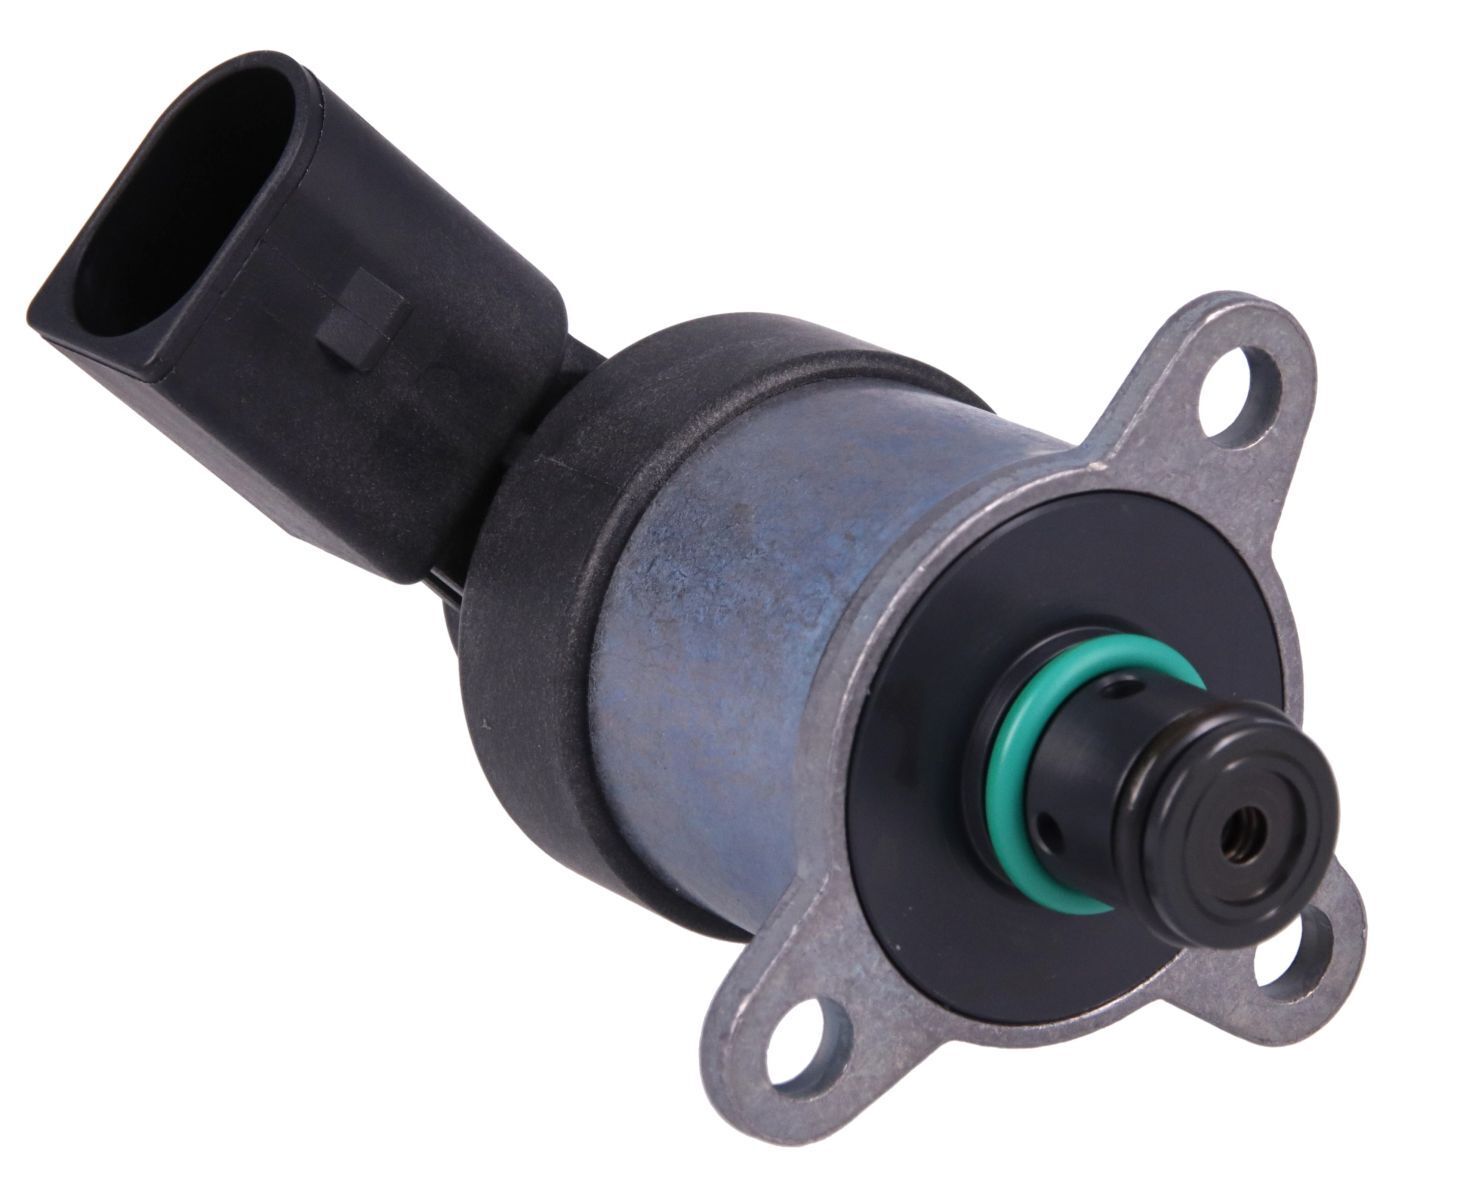 Suction control valve for Mercedes Benz S320 CDI W221 Diesel OM642.930  6-cyl 3.0 Turbo 5.08 - 9.09 S